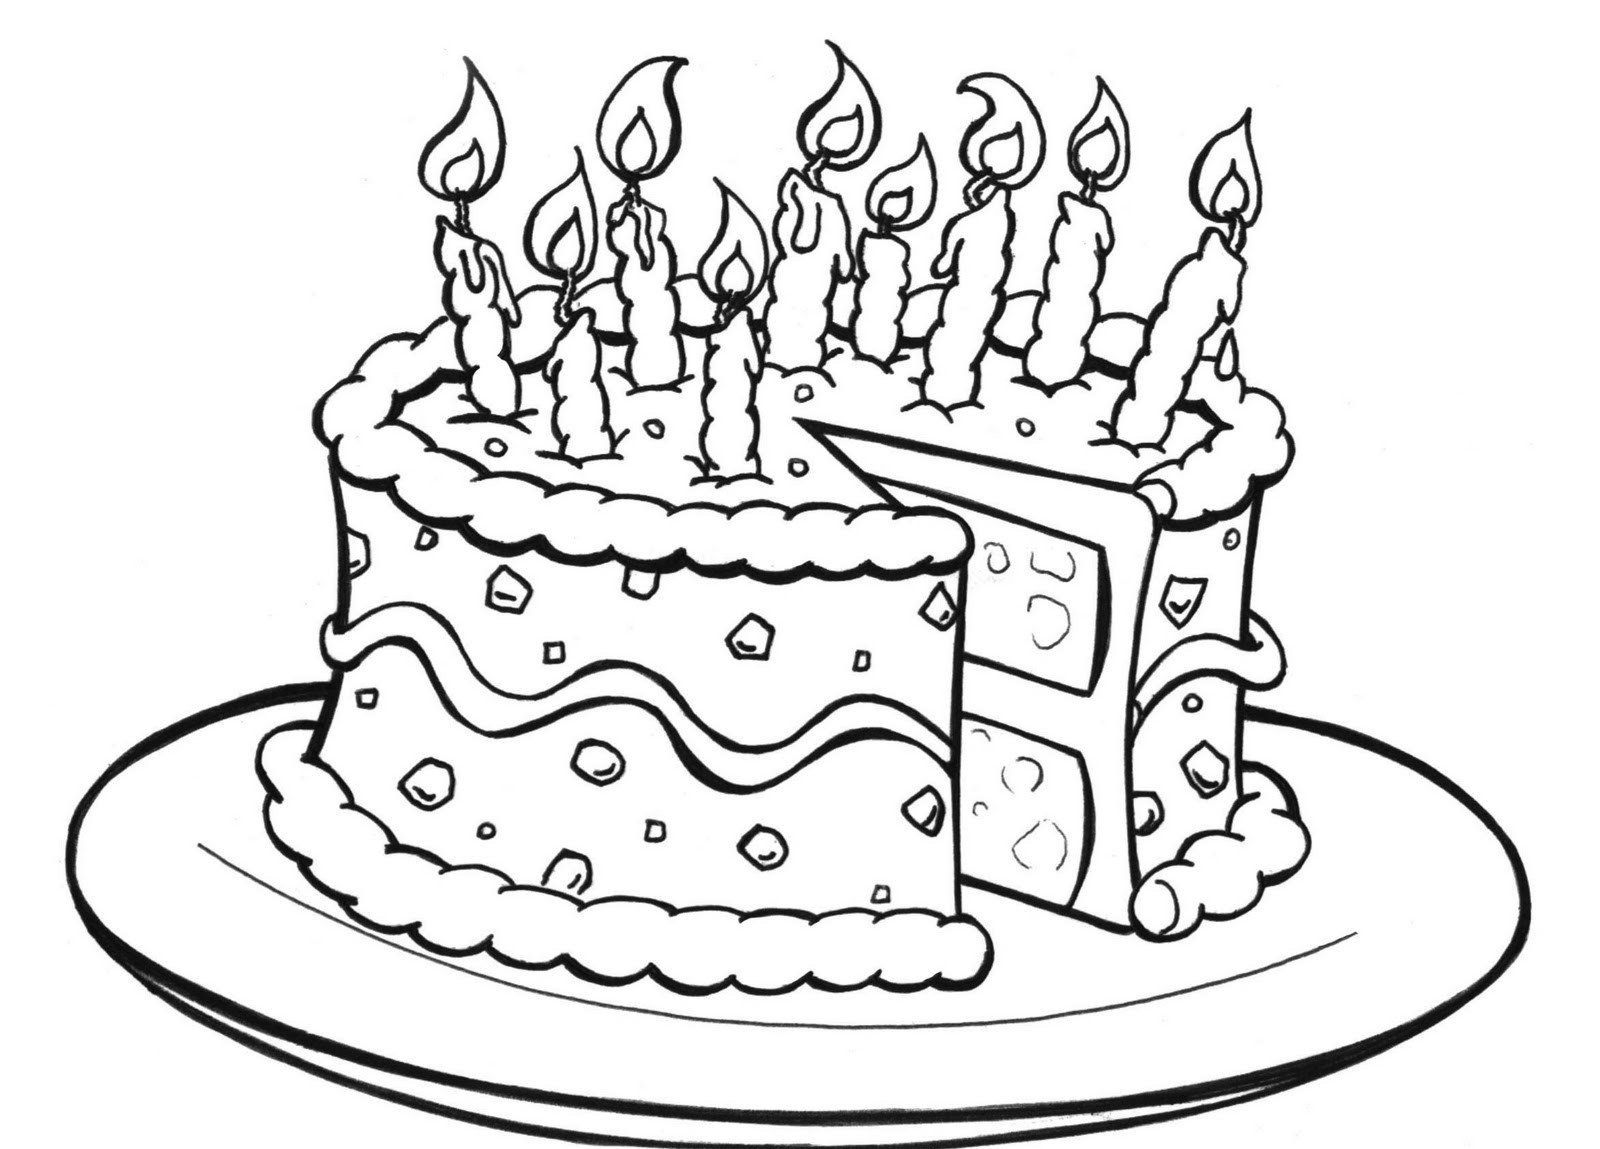 Printable Birthday Coloring Pages Coloring Pages Remarkable Free - Free Printable Birthday Cake